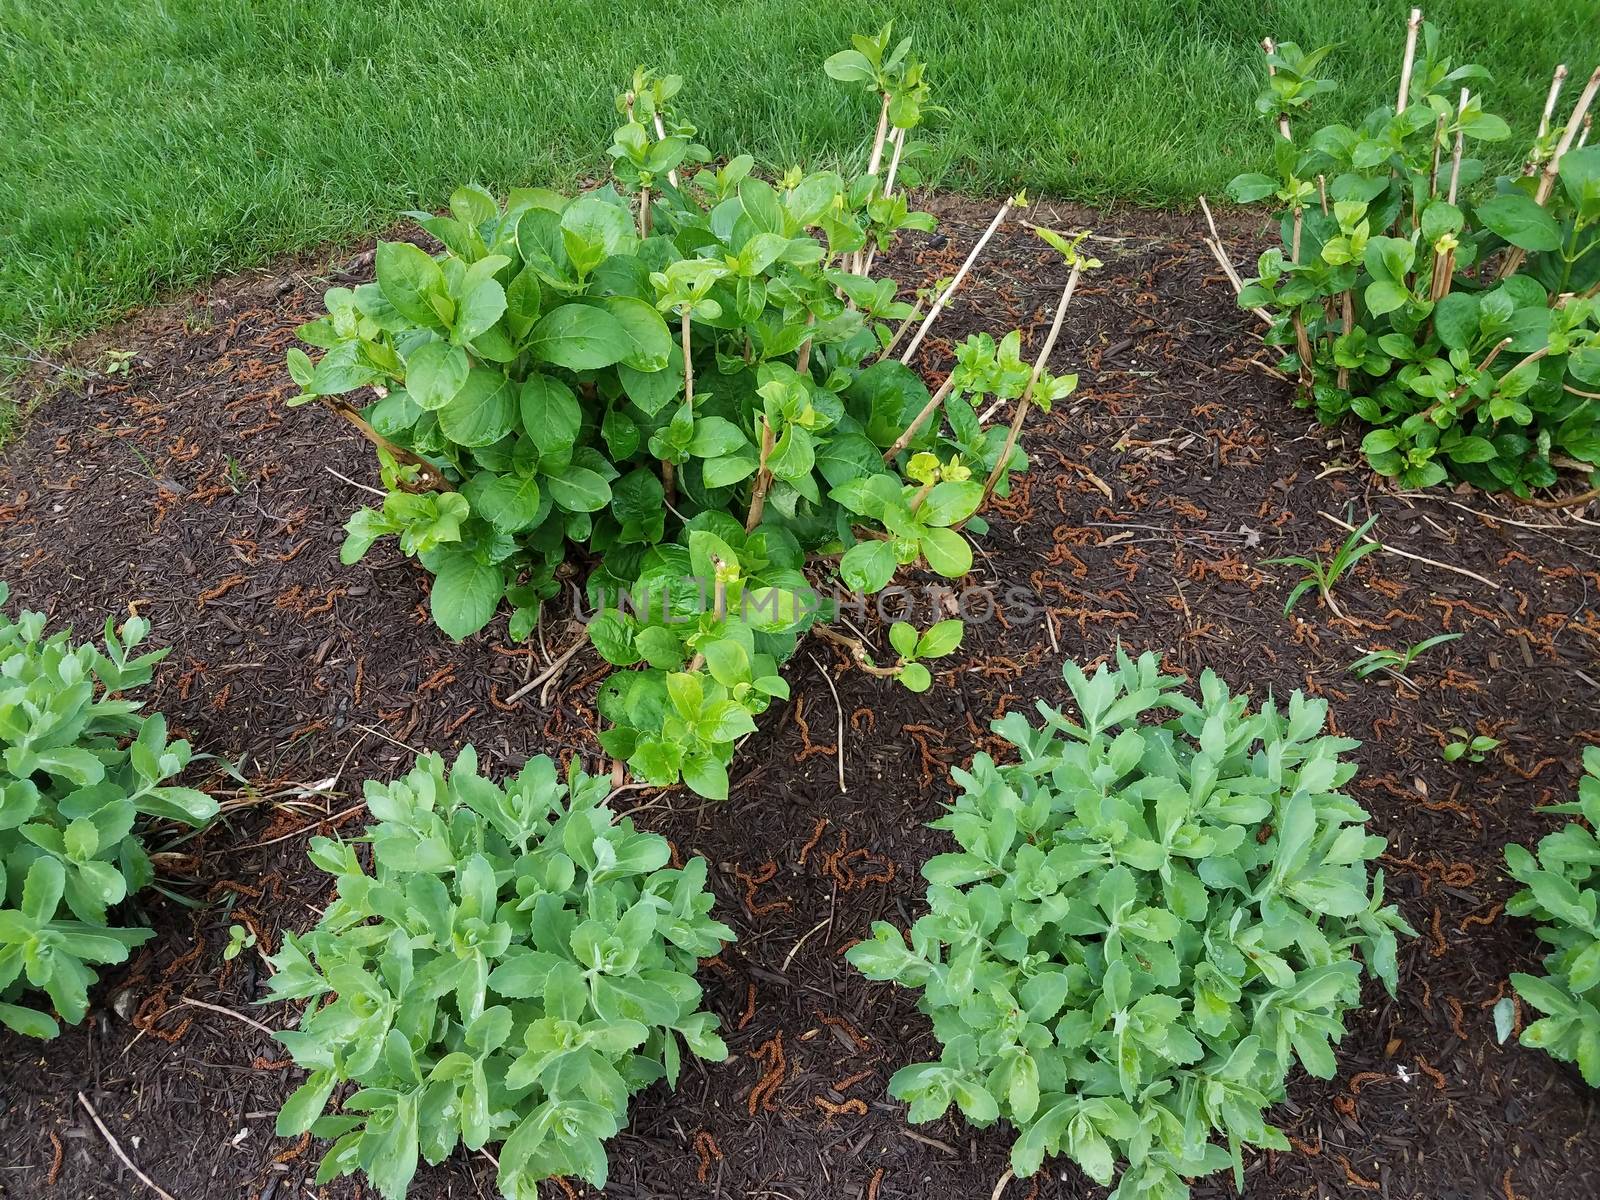 wet green leaves on plant or bush in brown mulch or soil